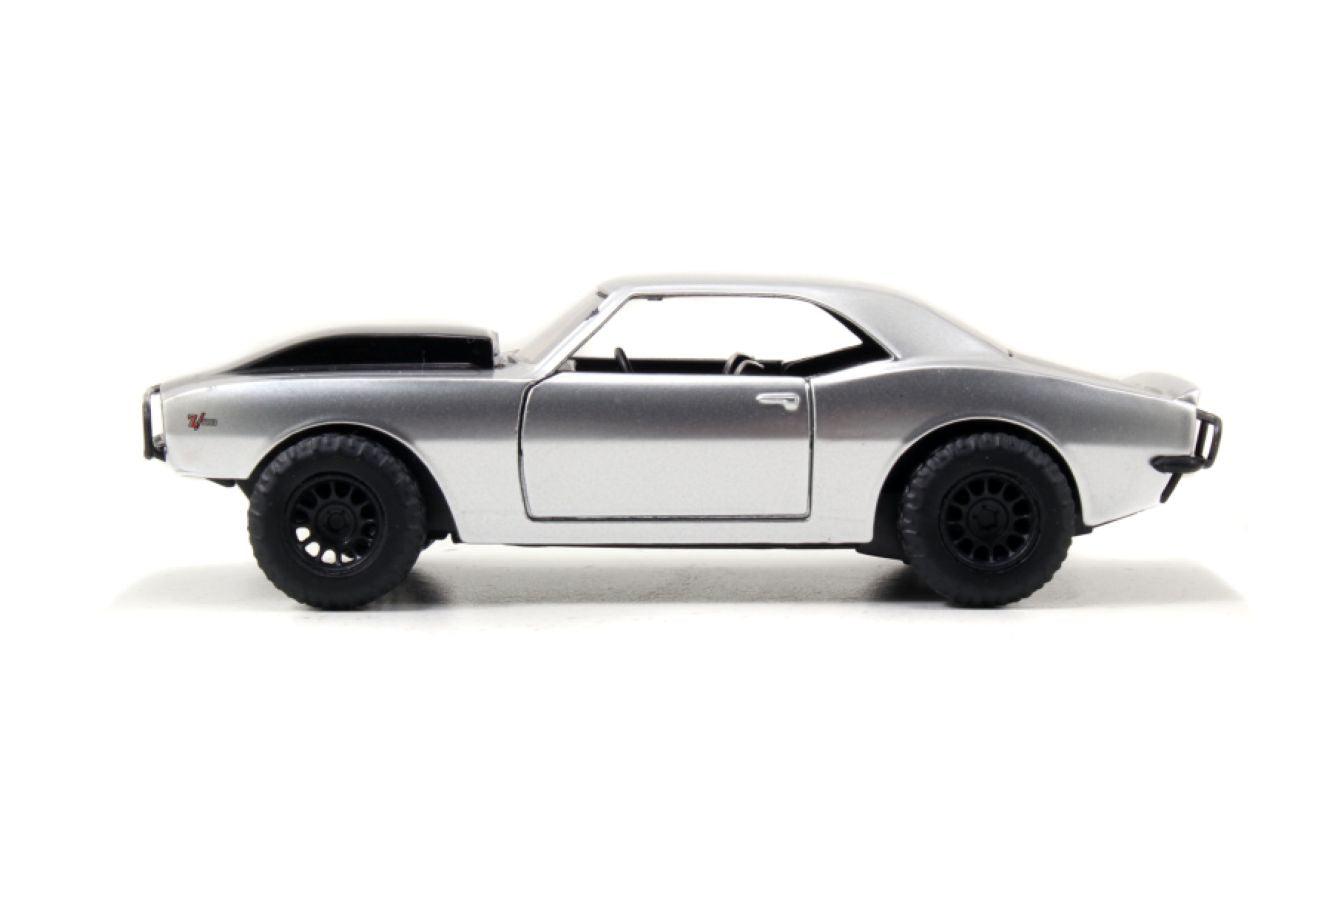 JAD97186 Fast and Furious - 1967 Chevy Camaro Offroad 1:32 Scale Hollywood Ride - Jada Toys - Titan Pop Culture